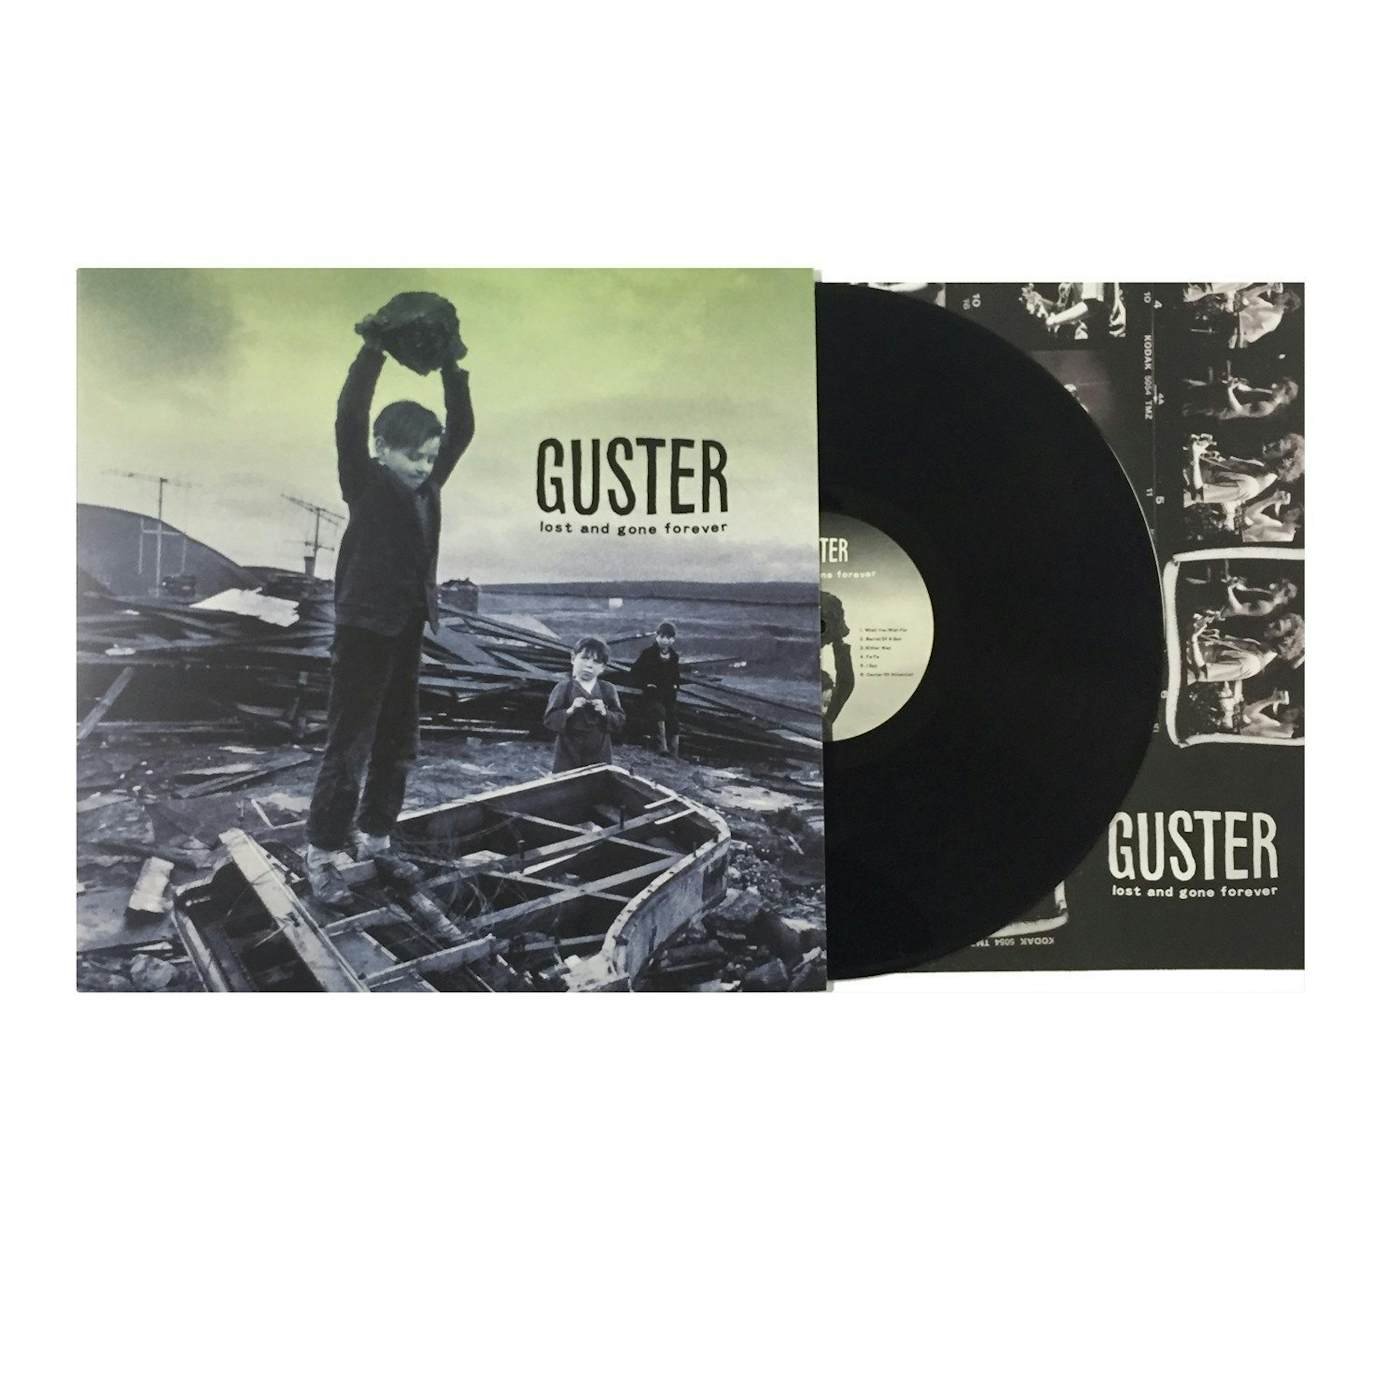 Guster 'Lost and Gone Forever' Vinyl LP